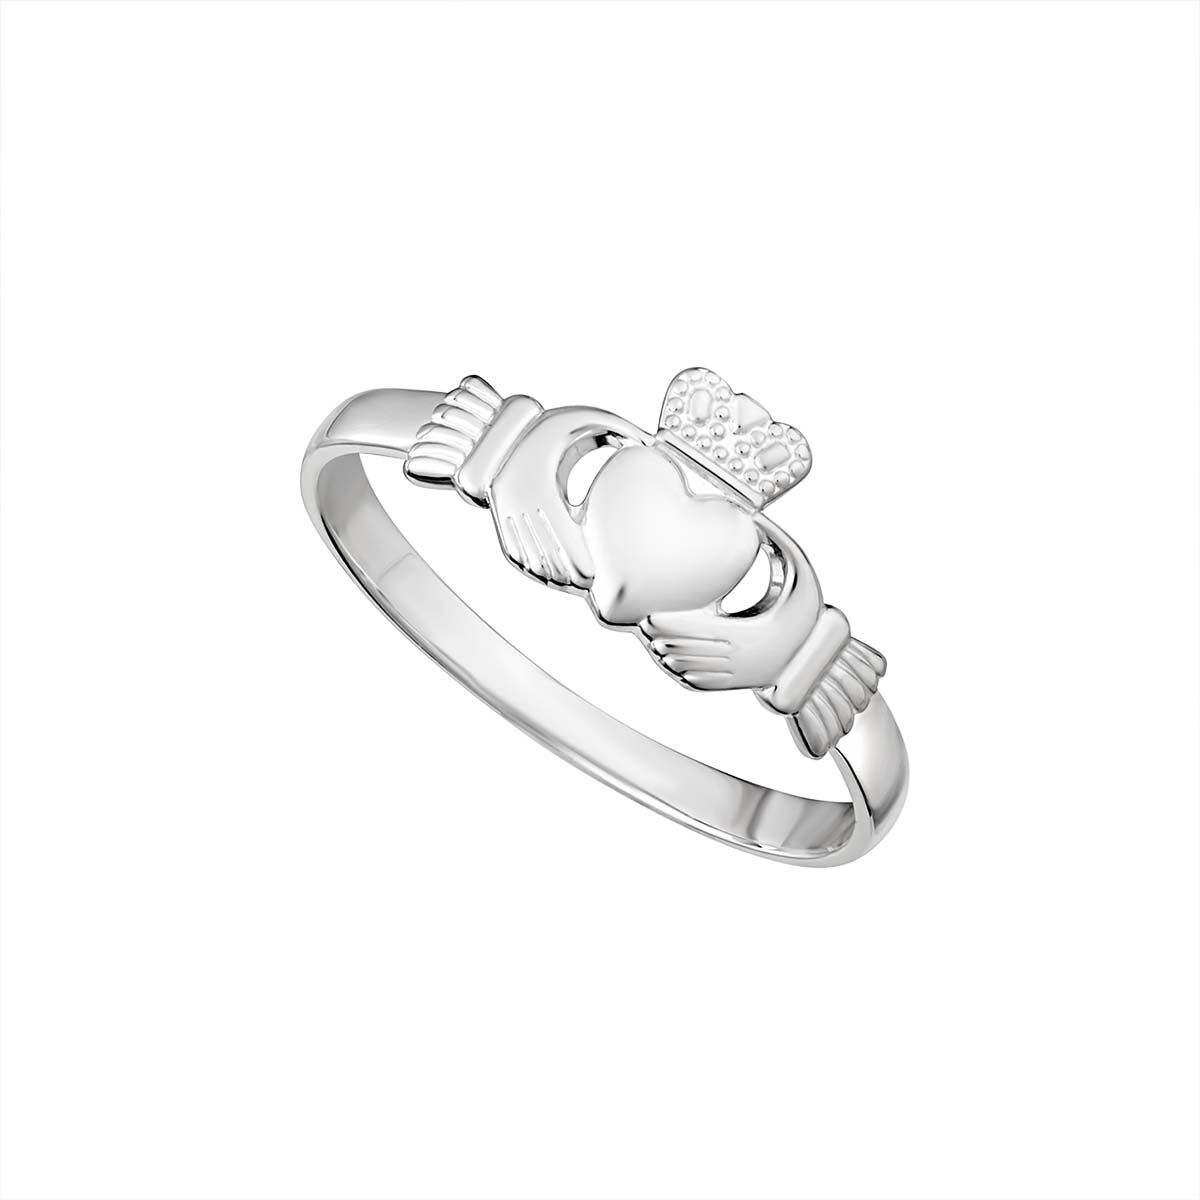 Buy Ladies Solvar Claddagh Ring In Pack Hallmarked Sterling Silver